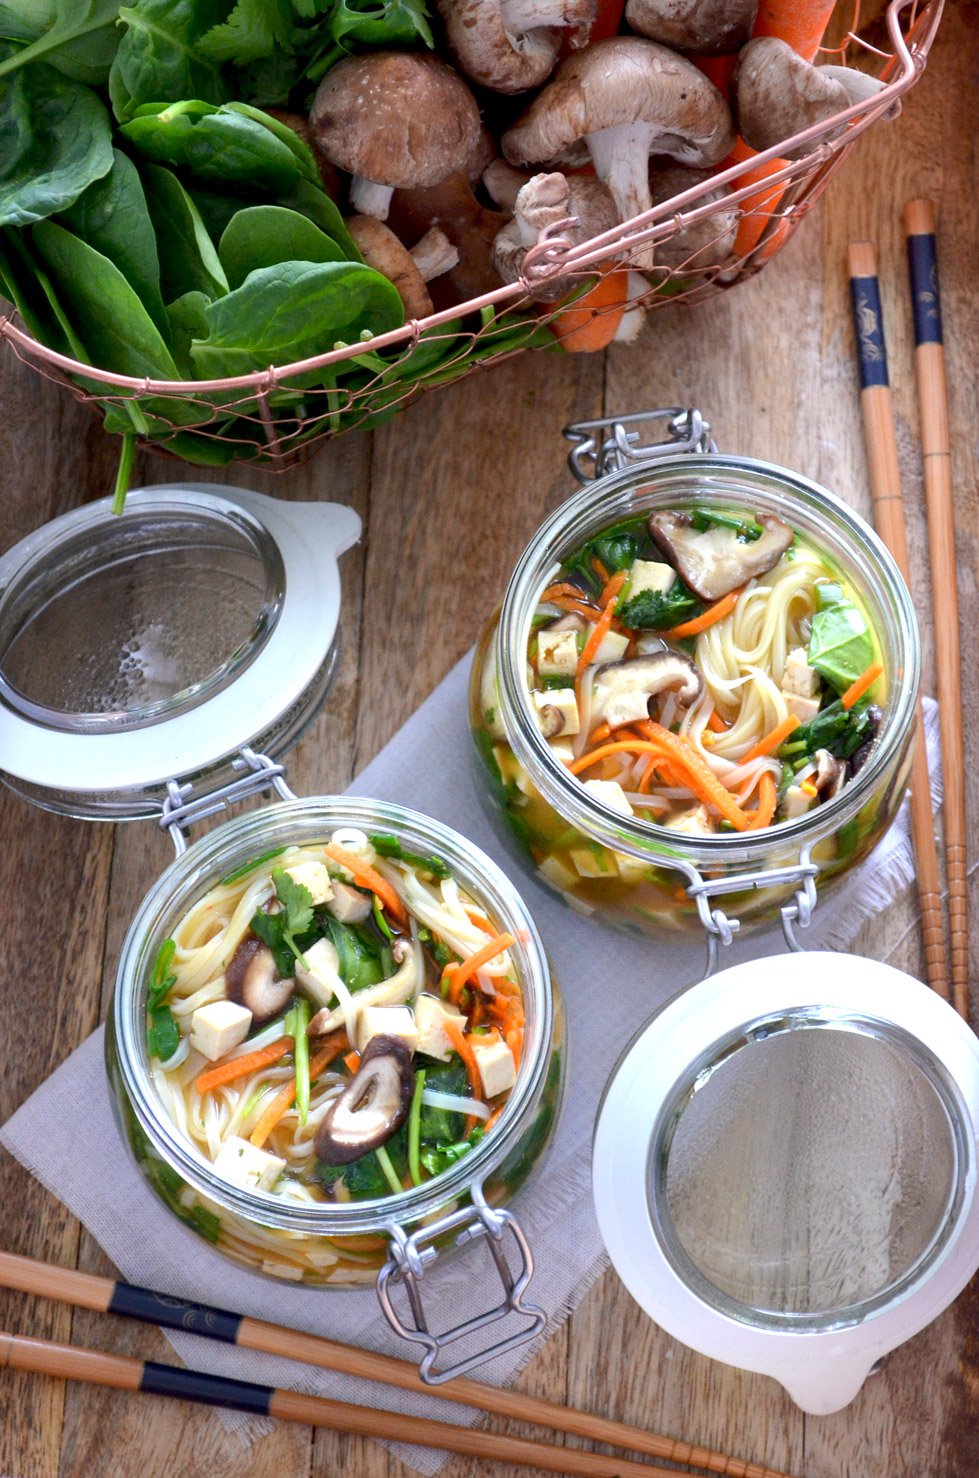 A recipe for Instant Noodle Soup Pots. Take the dry ingredients with you, e.g. to work. When you want your noodle soup, just pour boiling water in the jar, let sit for 2-3 minutes and you will have delicious, fresh, hot noodle soup. Recipe by That Healthy Kitchen